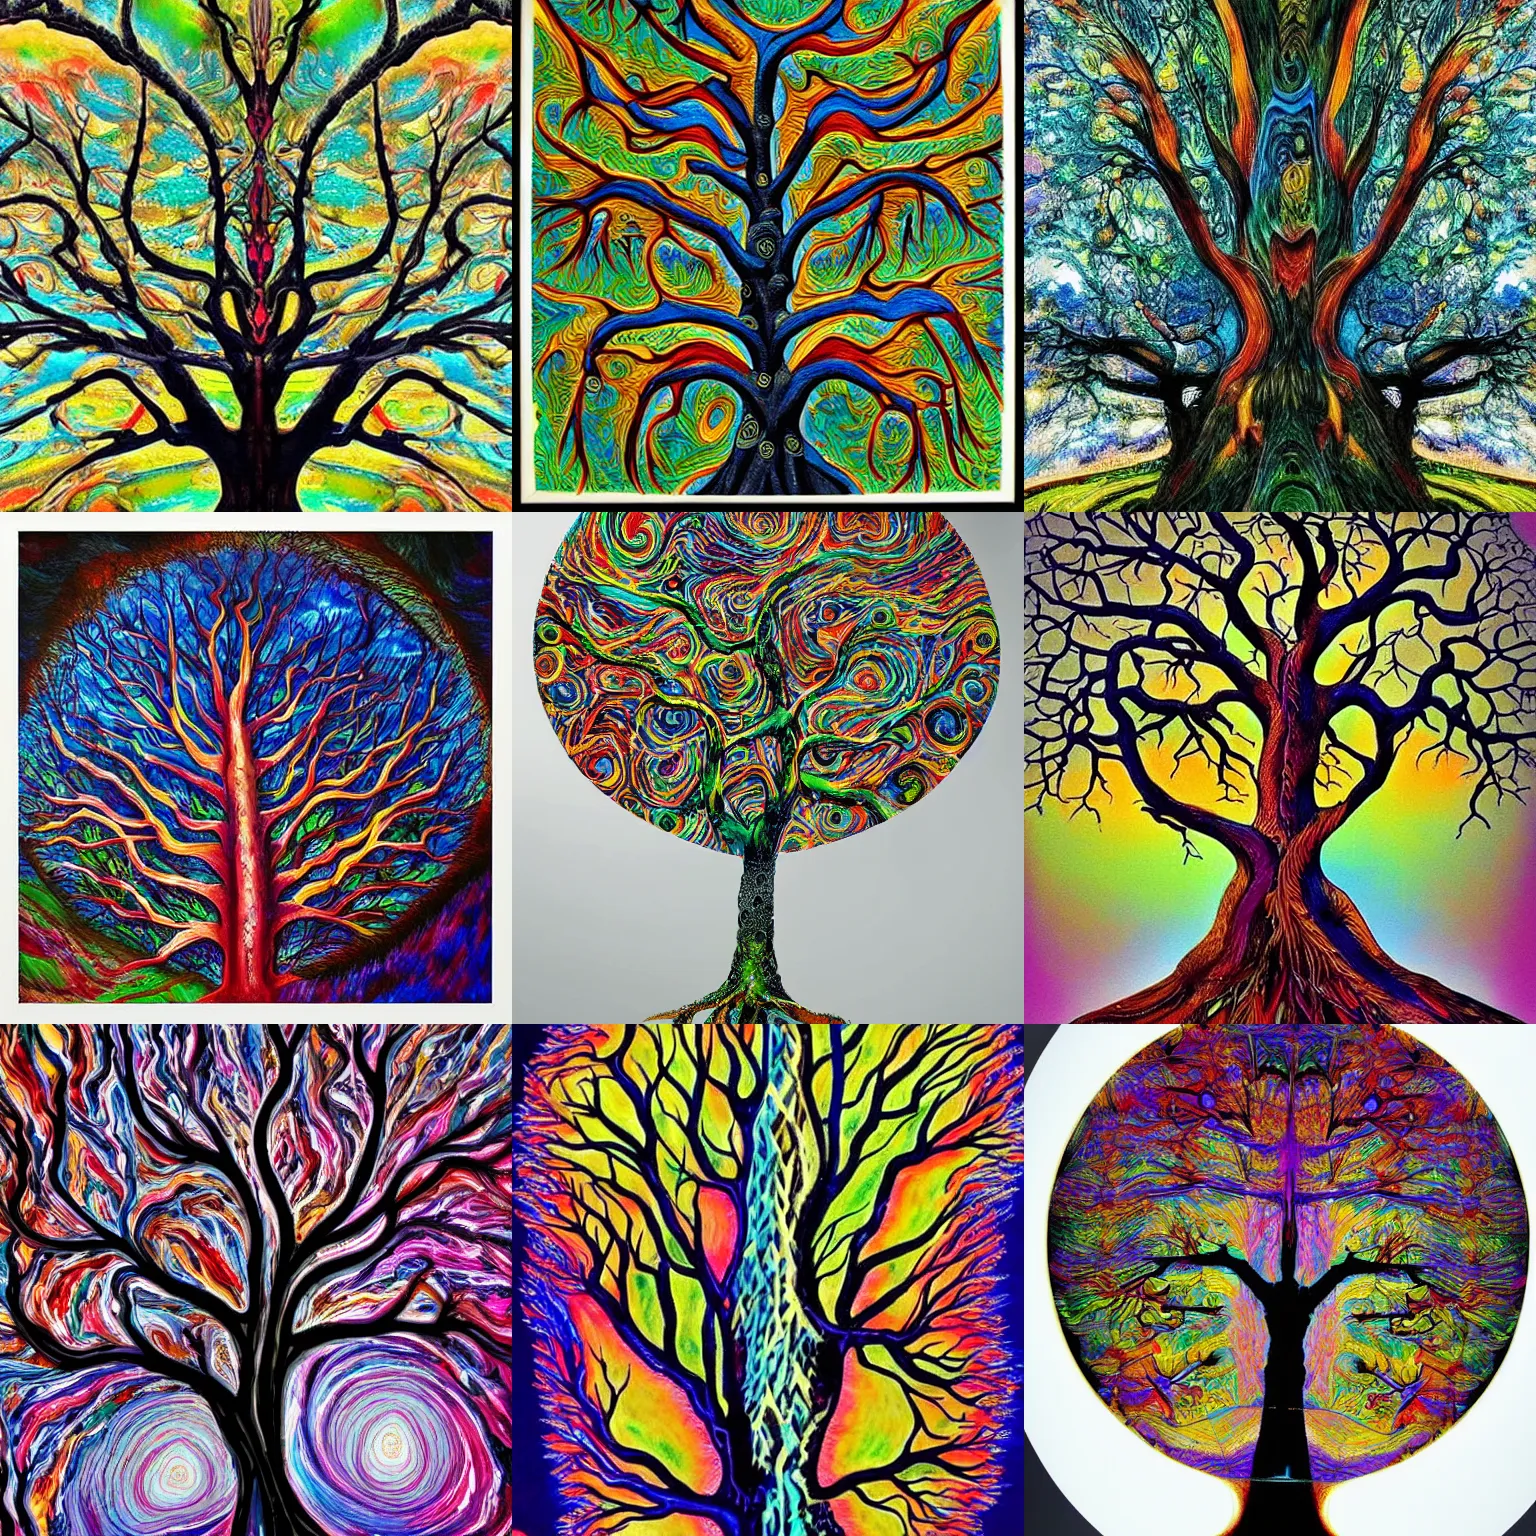 Prompt: a tree, on each branch there is a different animal, masterpiece, top of art, awesome, breathtaking, micro details. painted by masters of illusion and abstract thinking, slightly psychedelic